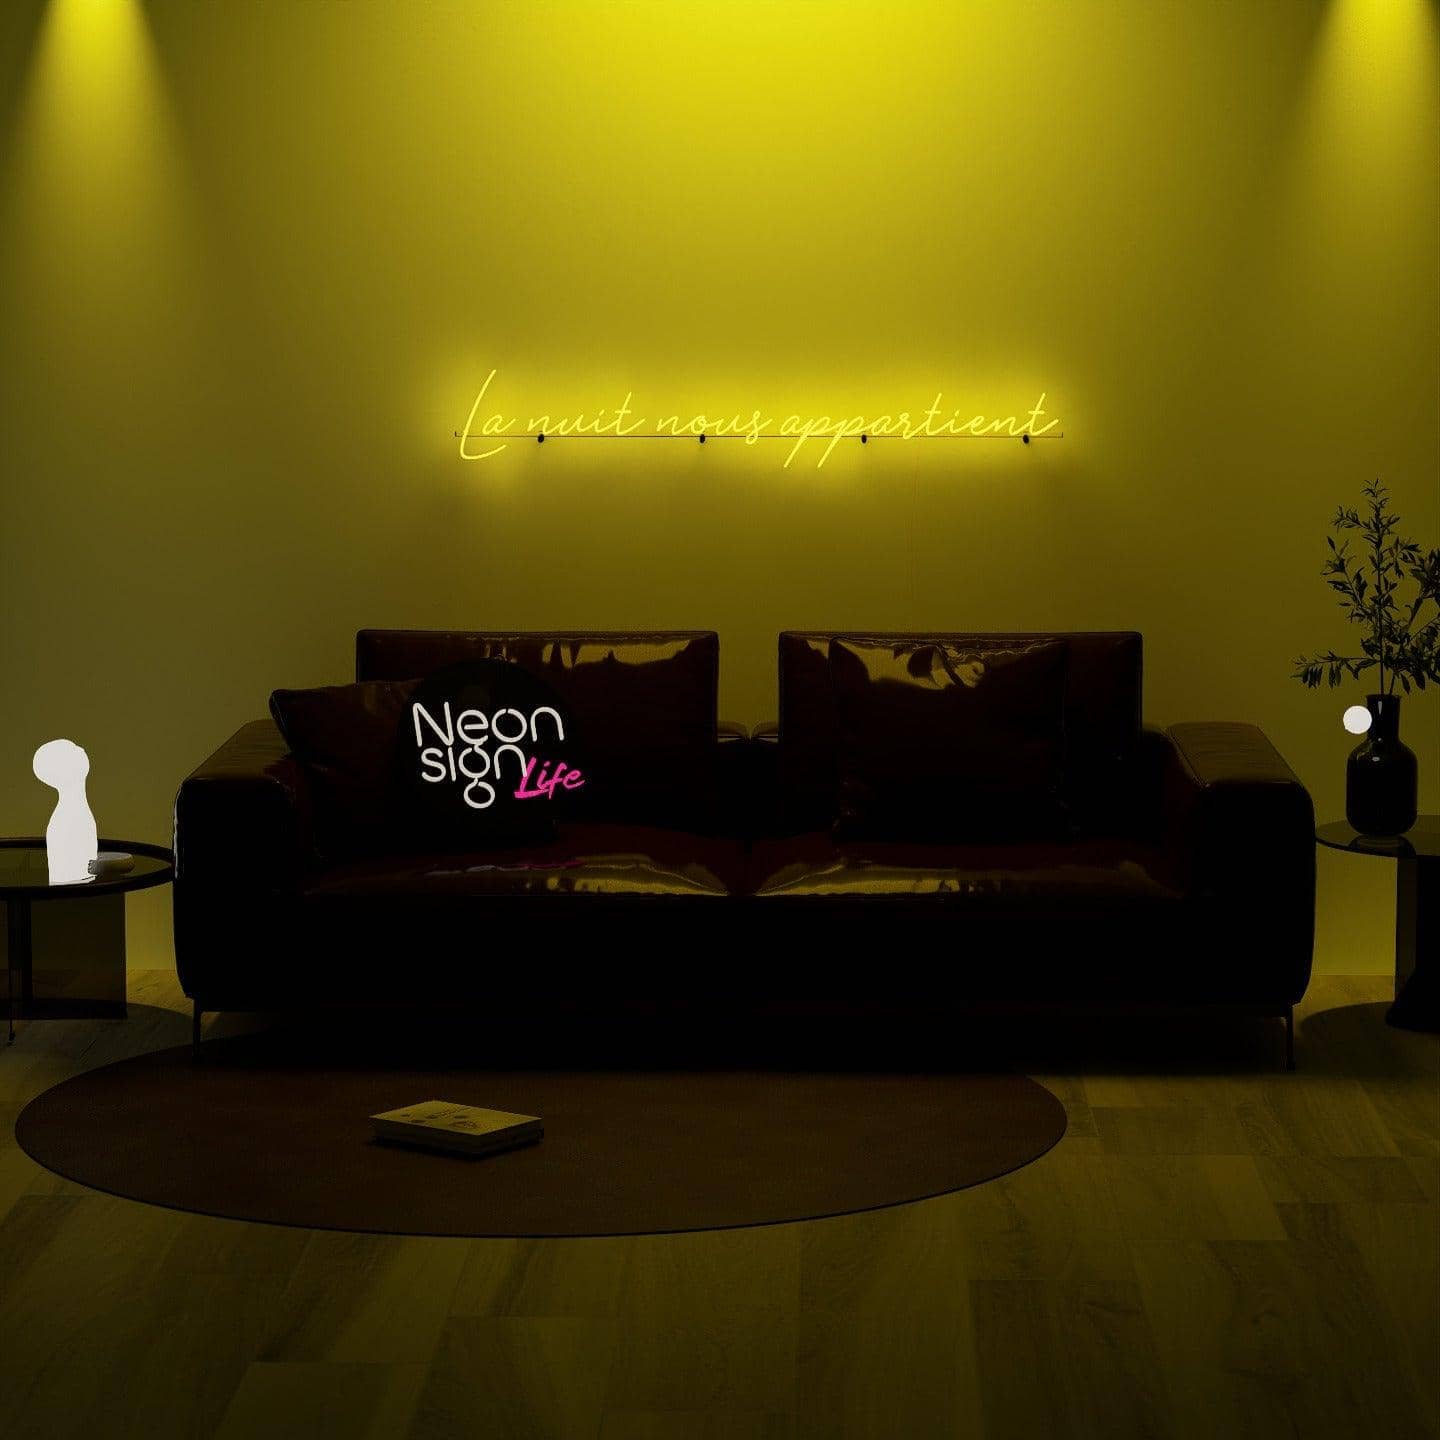 golden-neon-lights-illuminated-at-night-and-hung-on-the-wall-for-display-la-nuit-nous-appartient